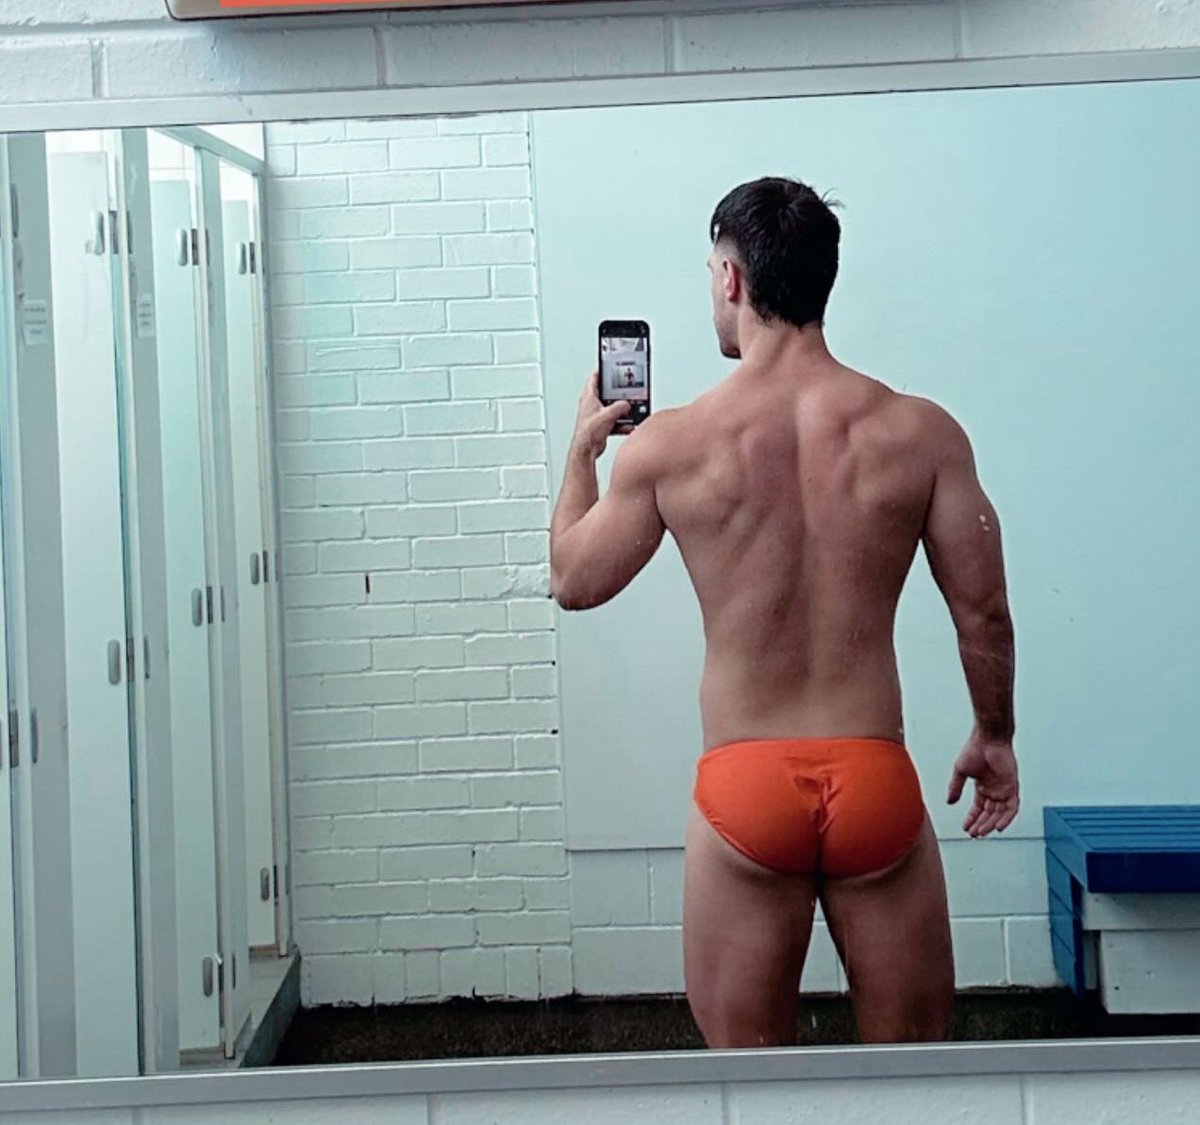 Since you all enjoyed the front so much… here’s the back! 🍑 onlyfans.com/ryan_greasley